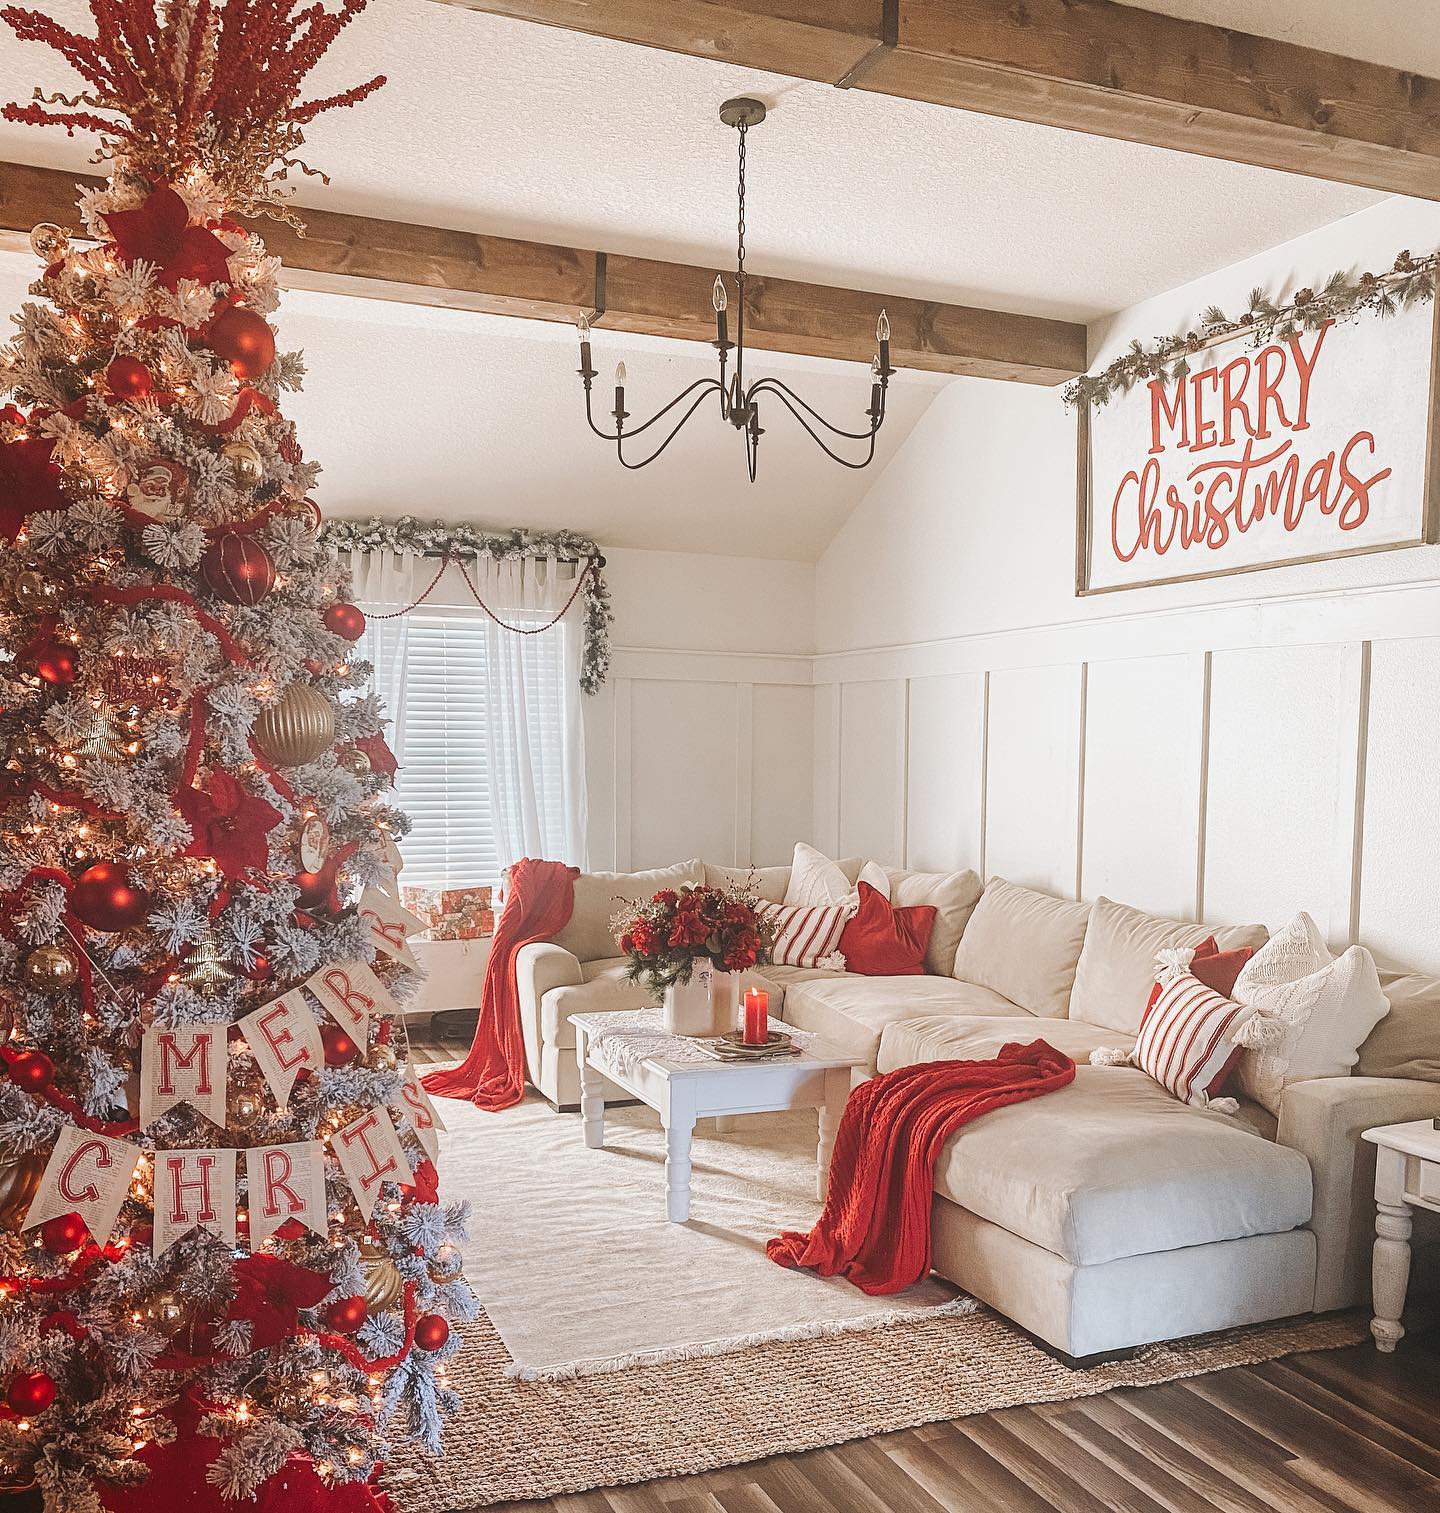 Christmas Rugs: Deck the Halls with Festive Rugs - The Roll-Out